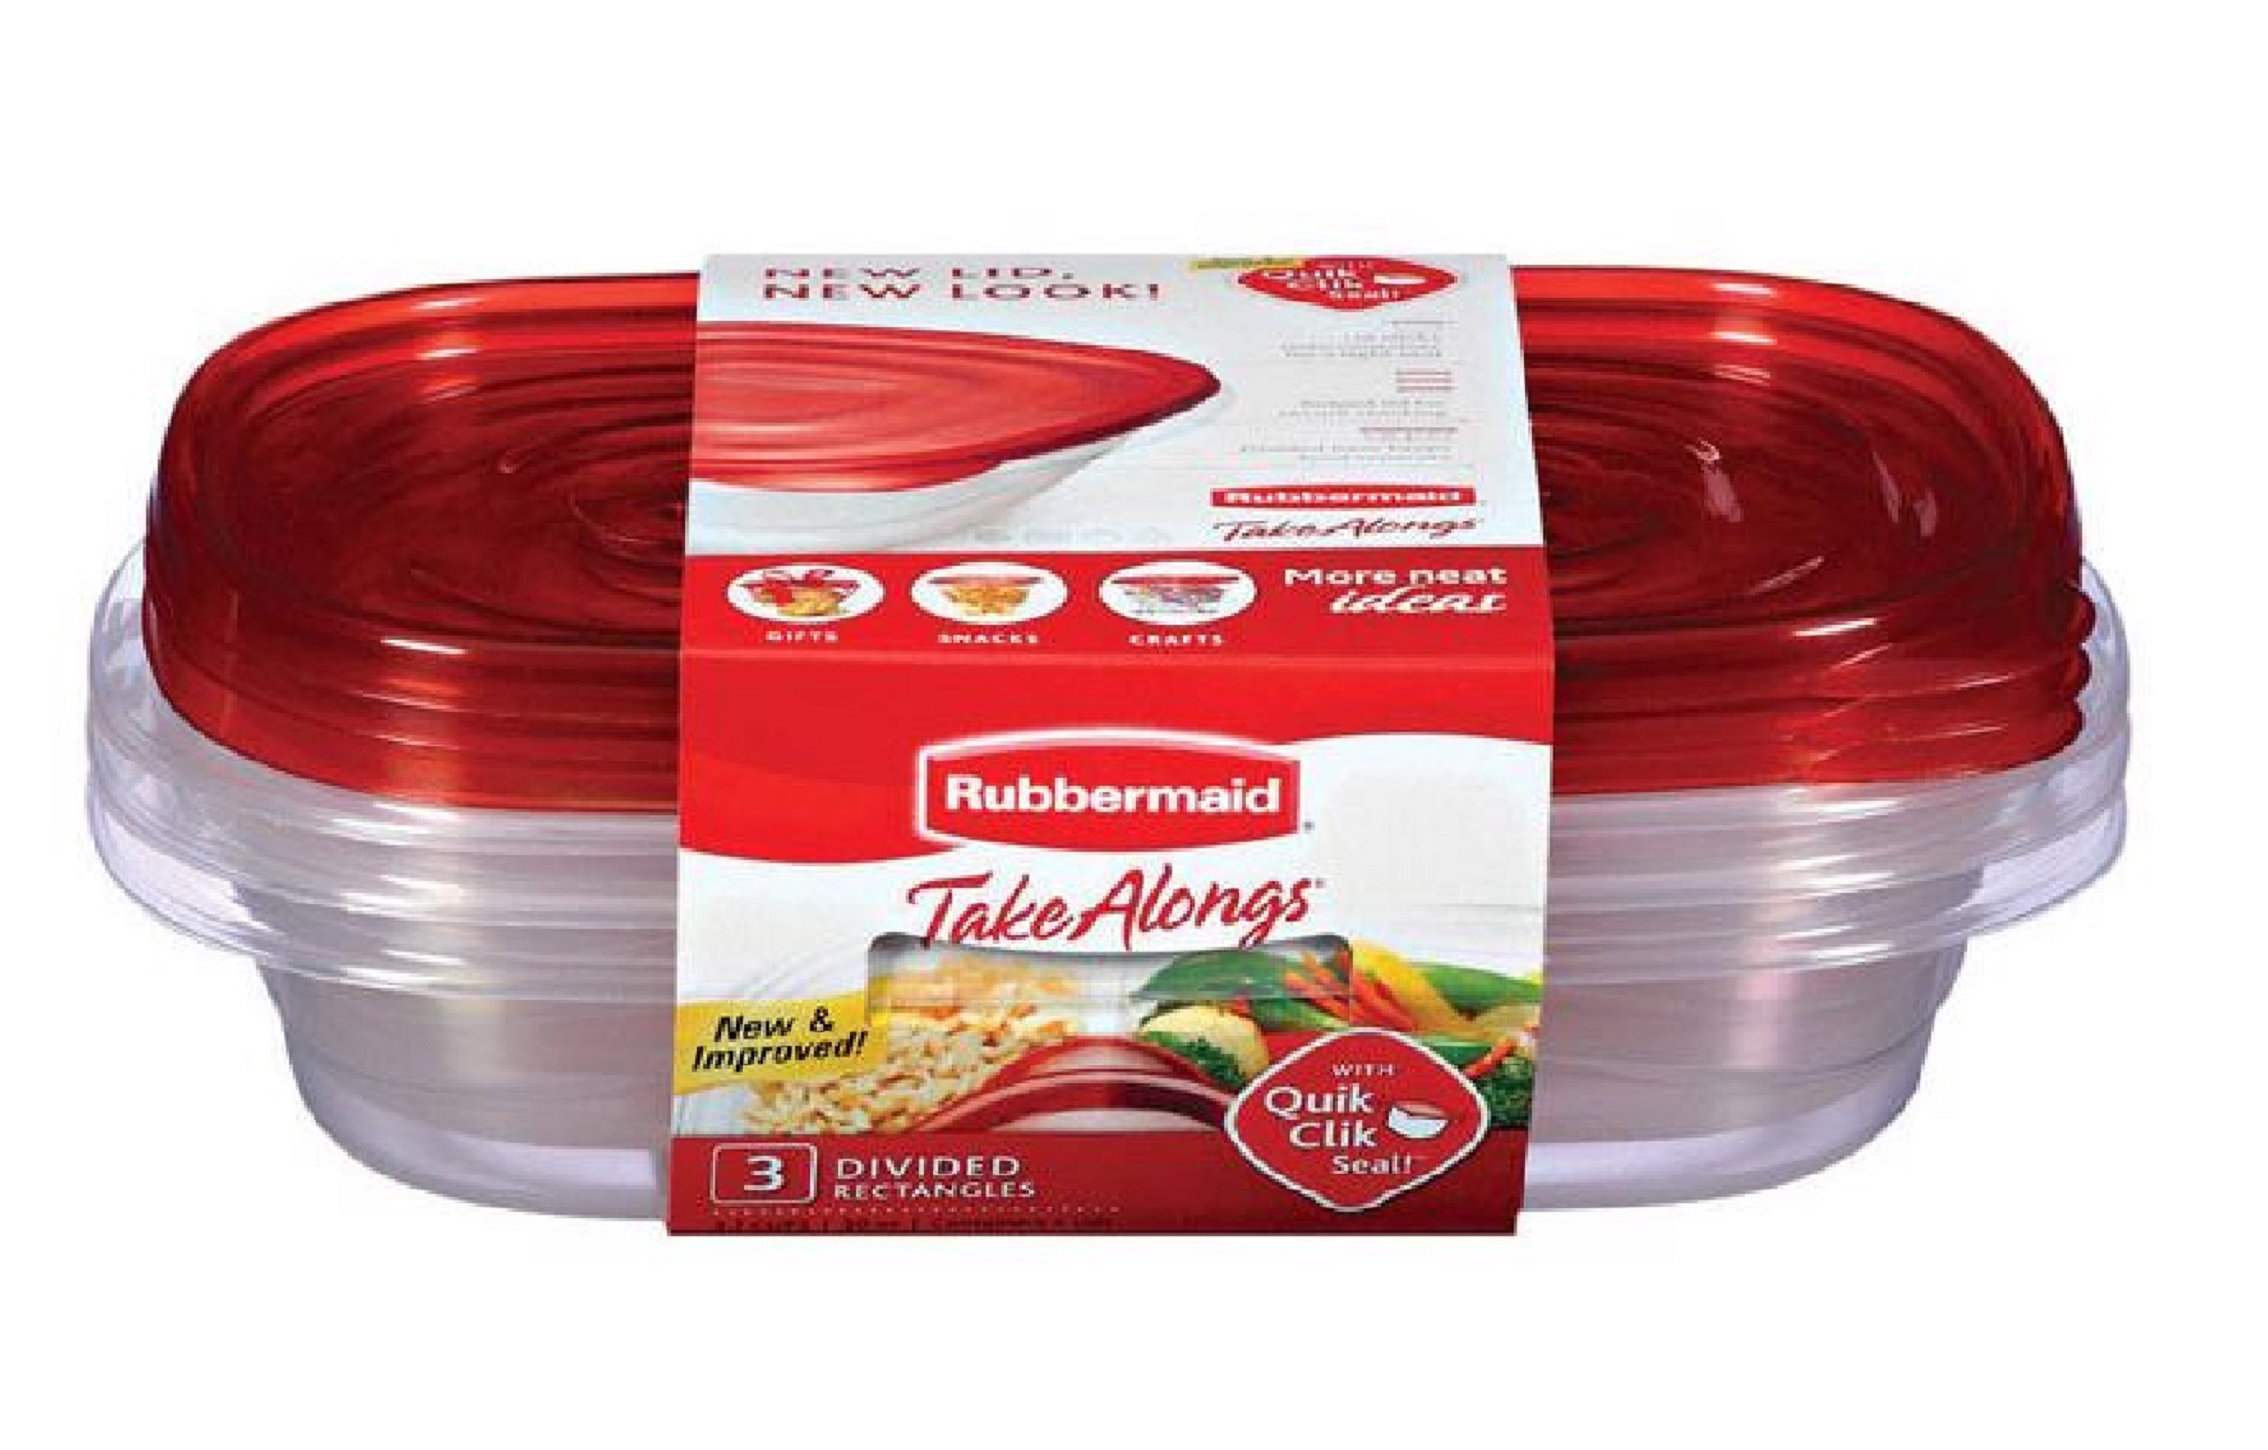 Rubbermaid TakeAlongs Containers + Lids, Rectangles - 2 containers + lids